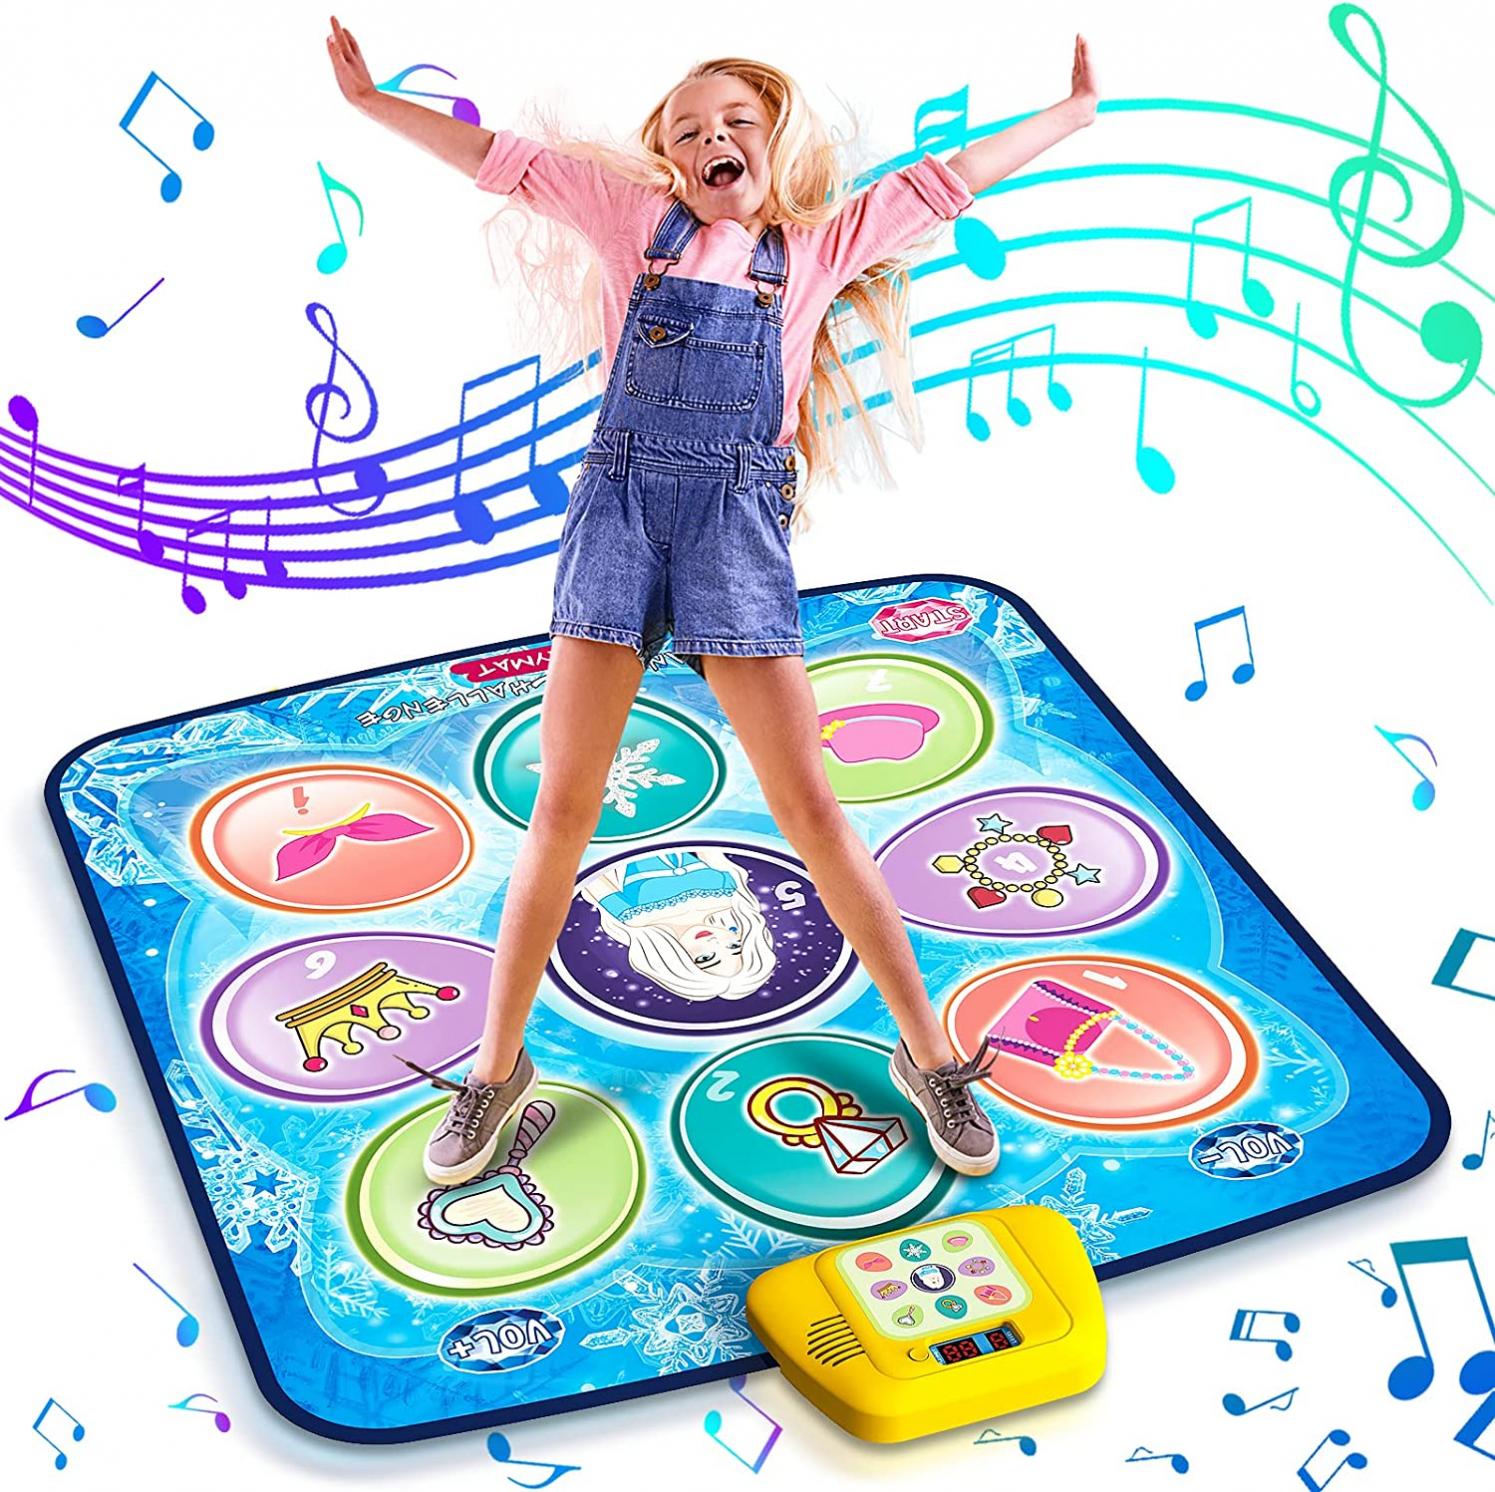 Dance Mat for Kids - Blue Frozen Themed Musical Dance Pad, Dance Game Toys with LED Lights, Including 5 Modes and 3 Challenge Levels, Christmas Birthday Gifts for Girls Boys Age 3 4 5 6 7 8-12